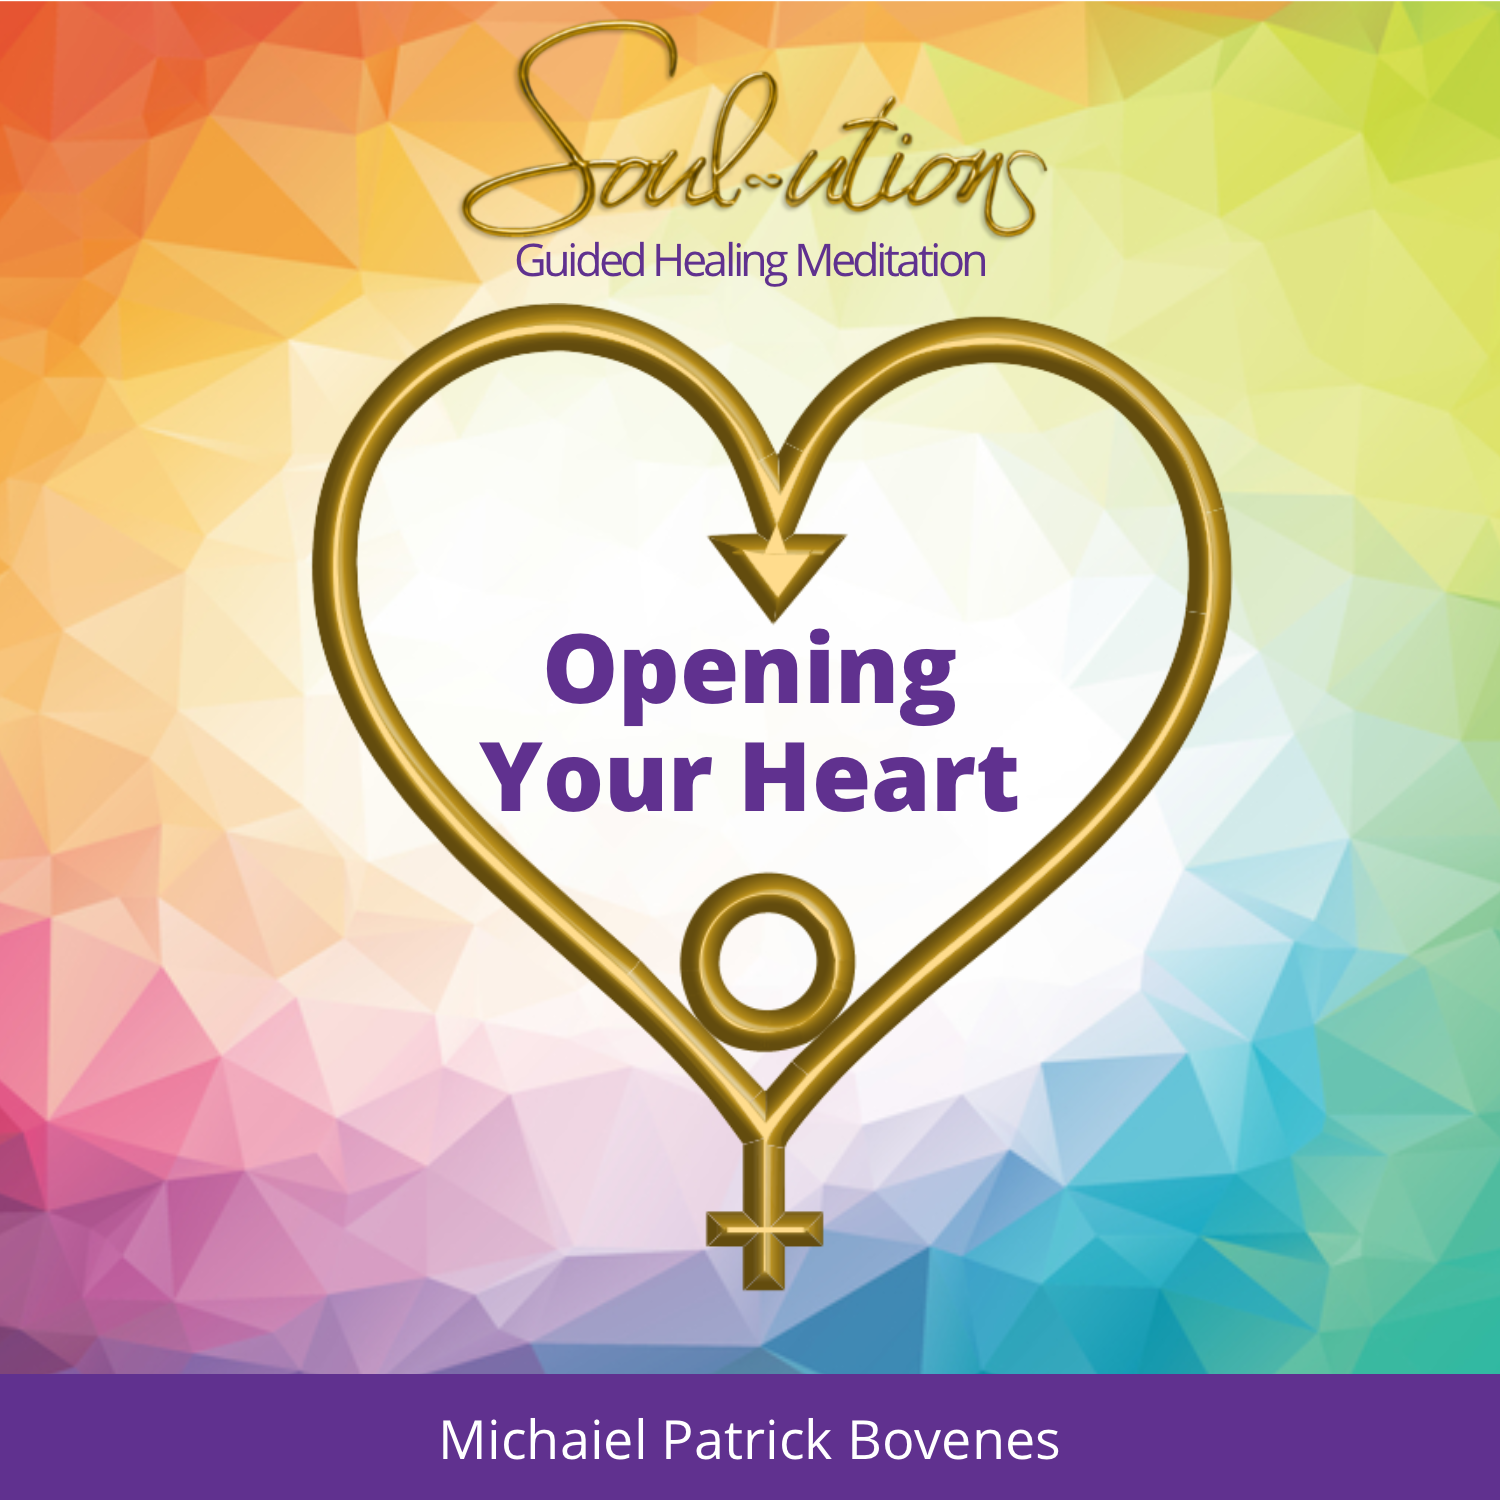 Open Your Heart Center to Allow More Love into Your Life - •